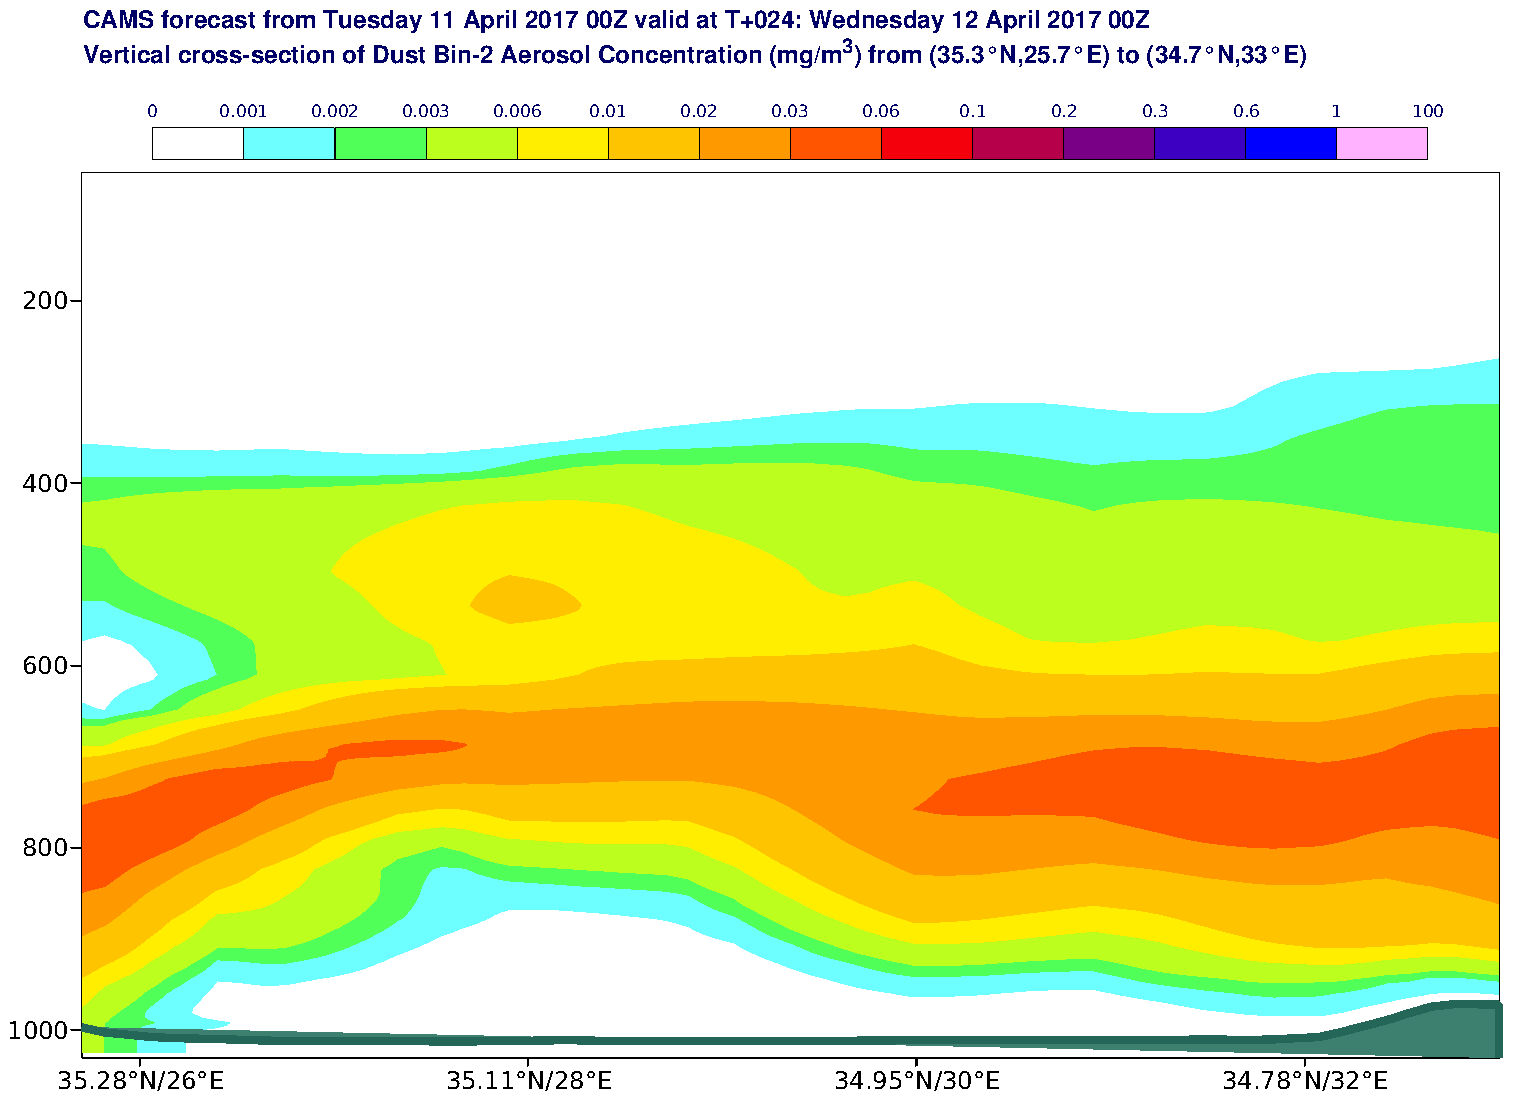 Vertical cross-section of Dust Bin-2 Aerosol Concentration (mg/m3) valid at T24 - 2017-04-12 00:00